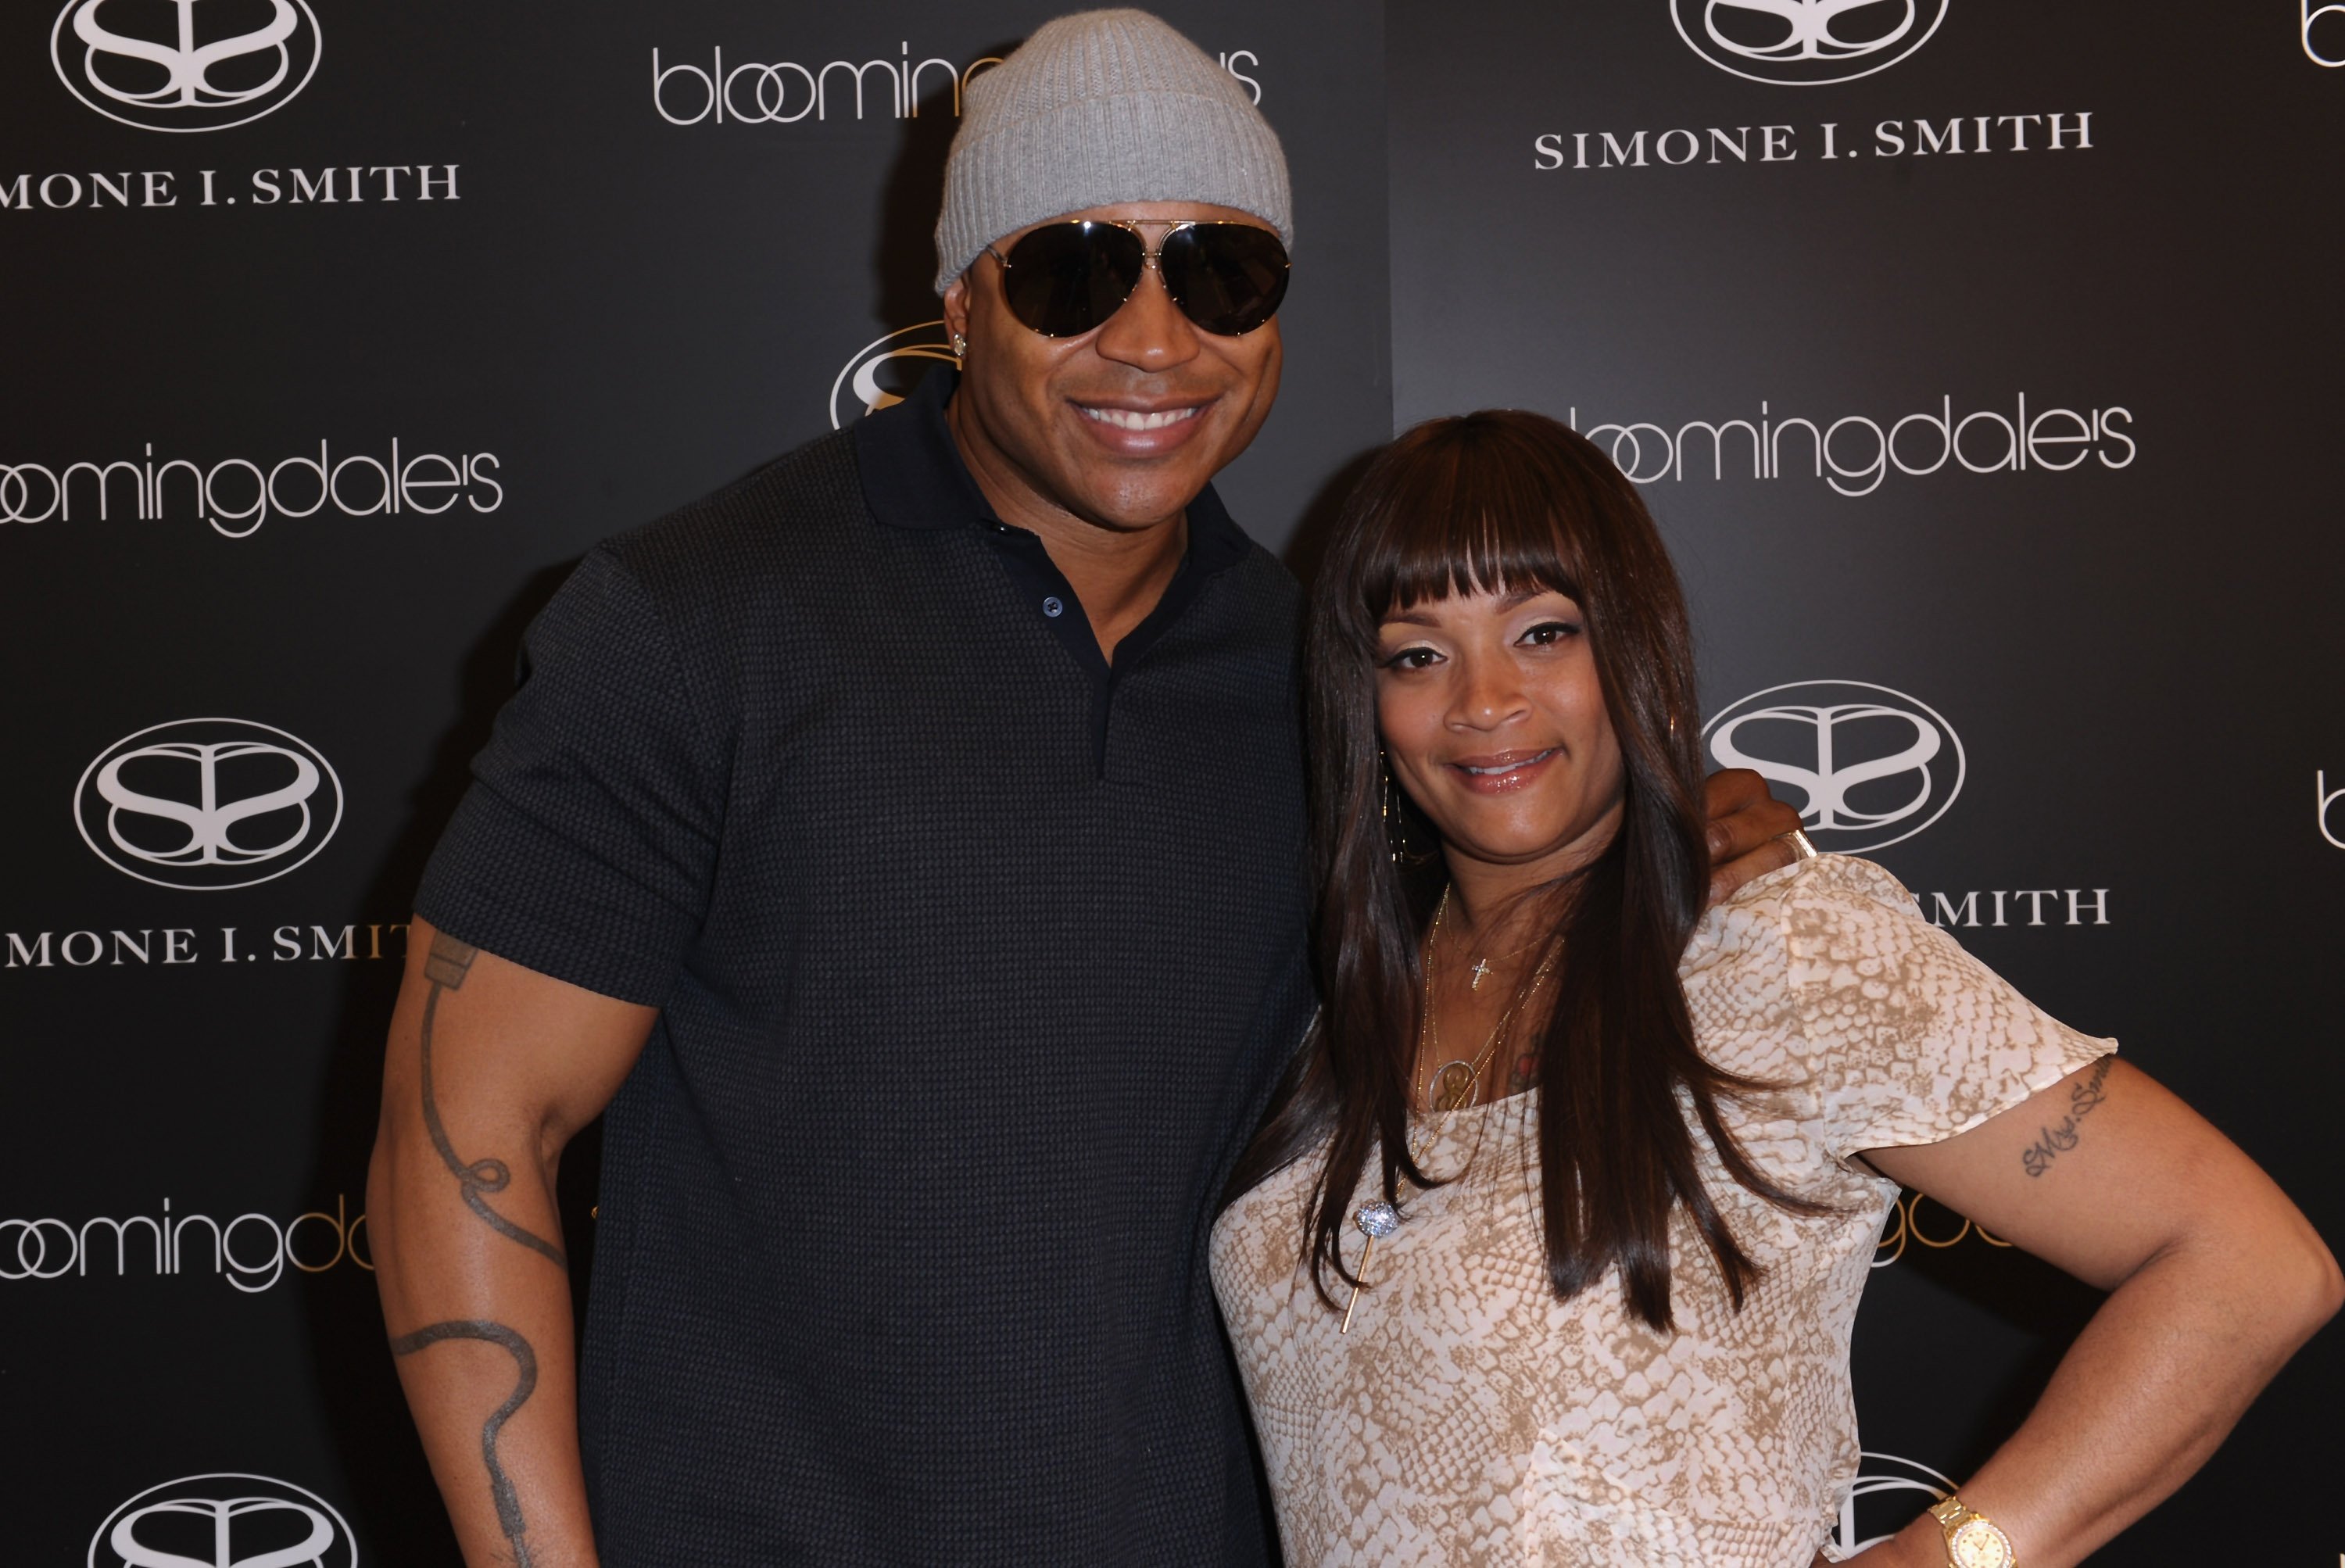  LL Cool J and designer Simone I. Smith at her personal appearance for Bloomingdale's on May 12, 2011 in Century City, California.| Source: Getty Images